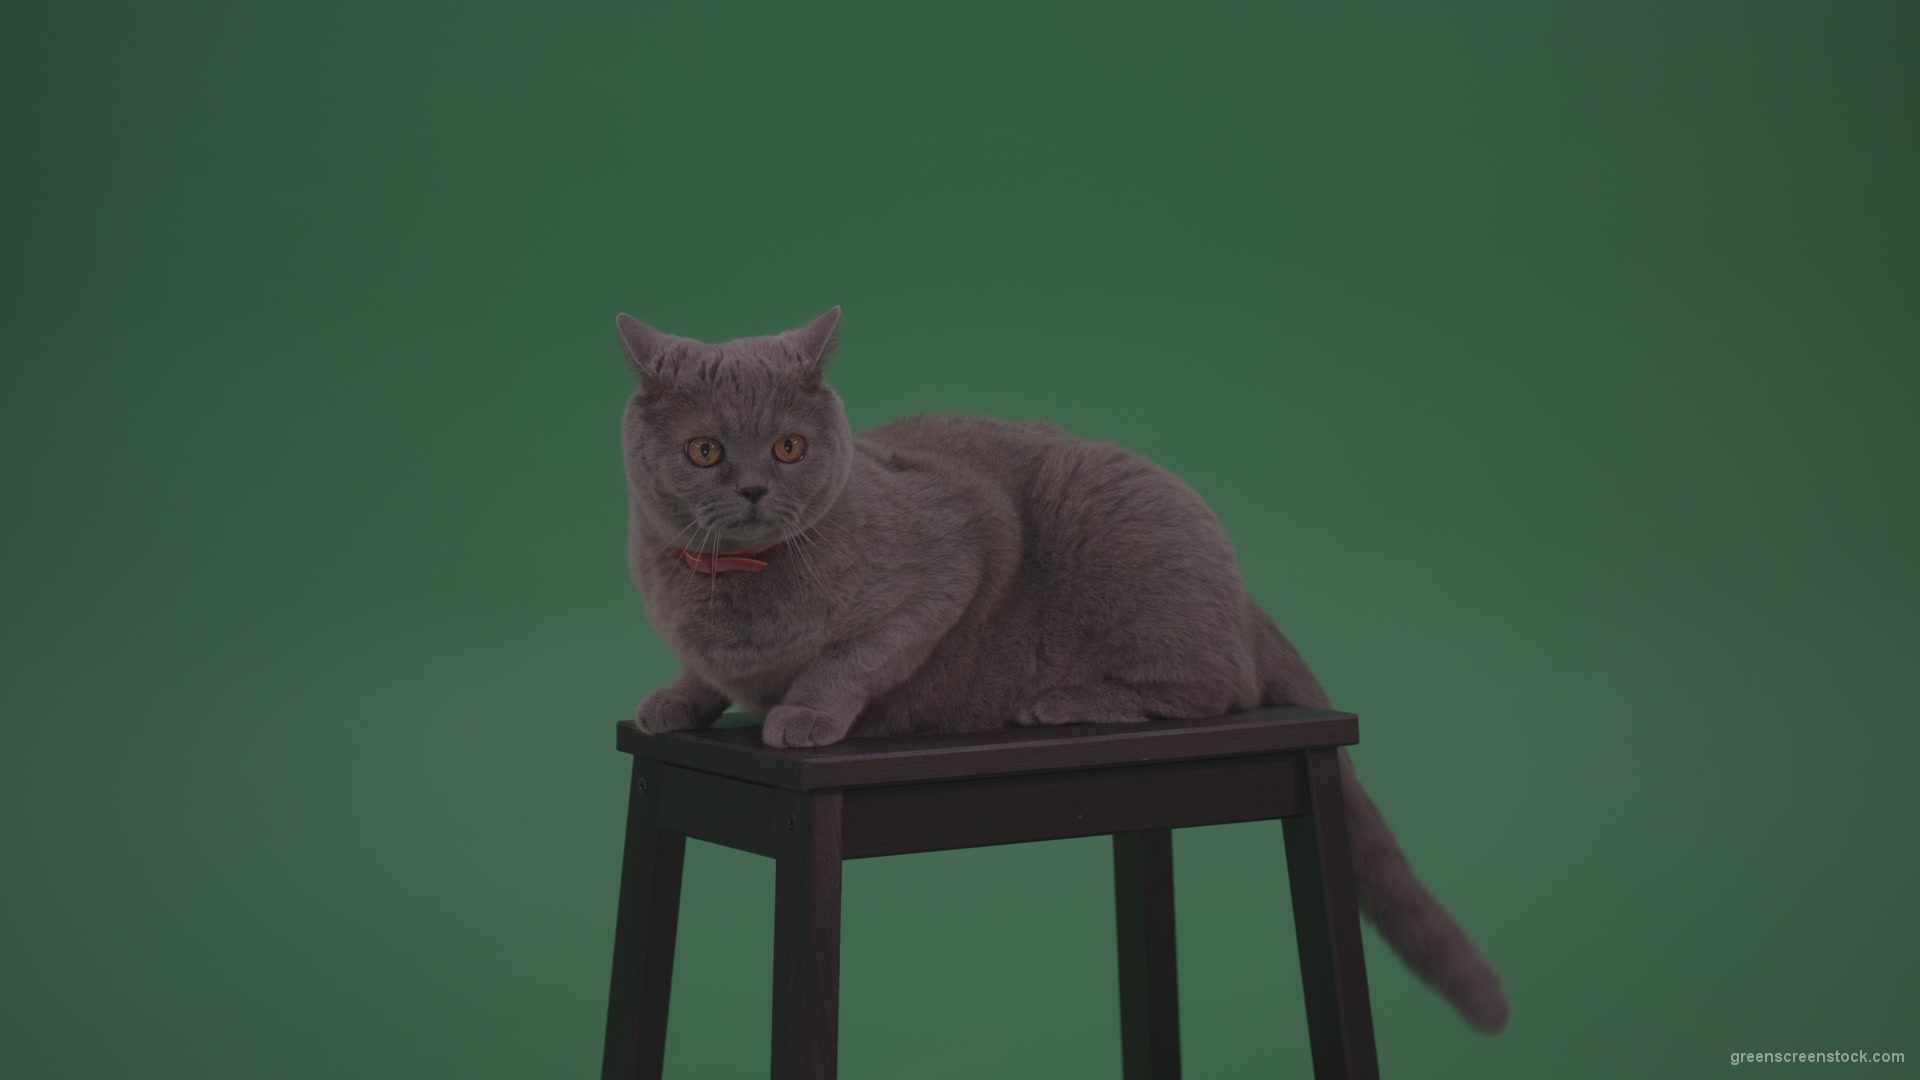 British-Gey-Cat-Sitting-On-Stool-Wagging-The-Tail-On_Green-Screen-Chroma-Key-Wall-Background_006 Green Screen Stock